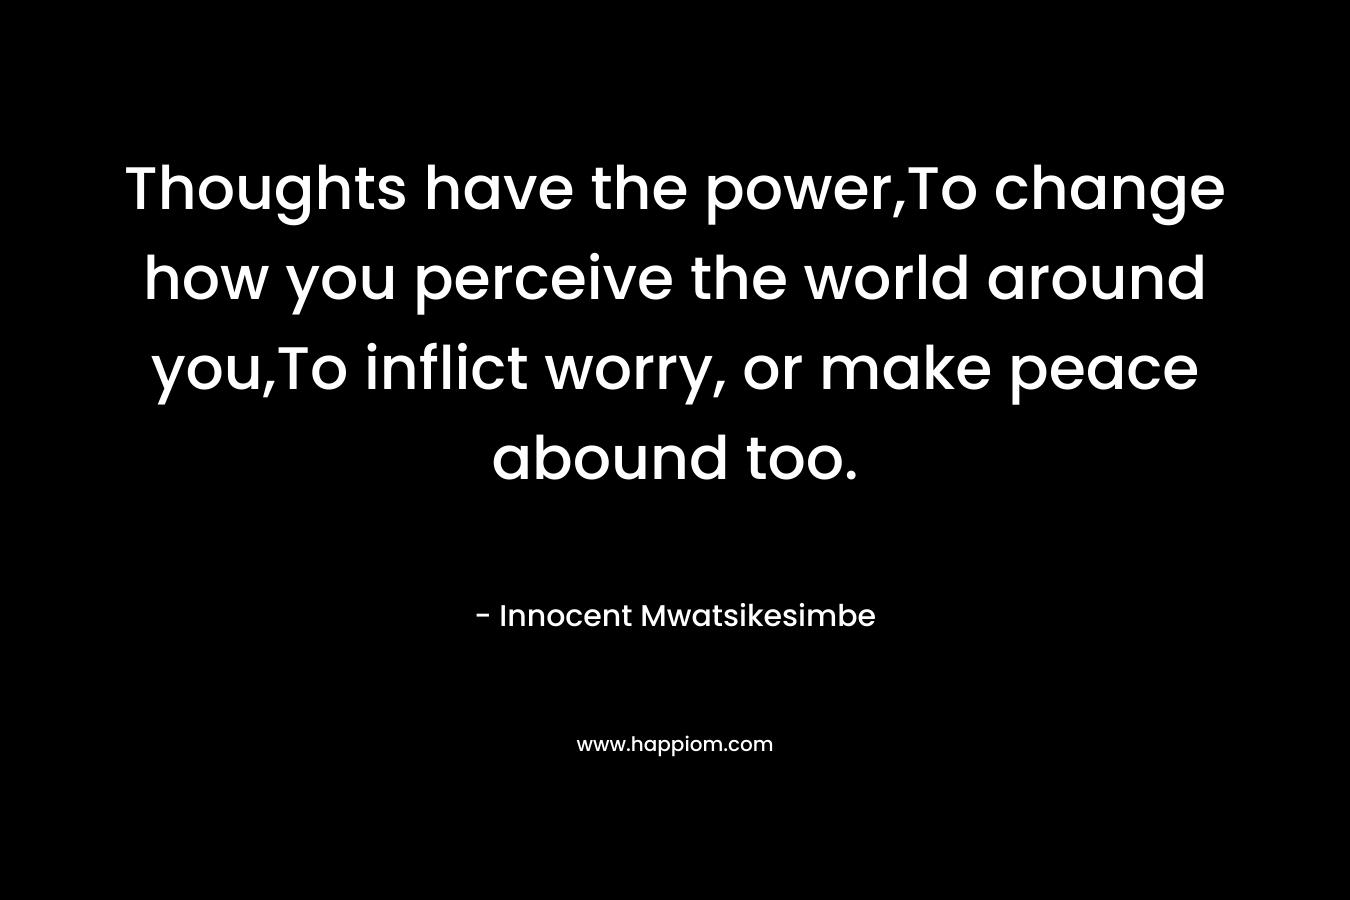 Thoughts have the power,To change how you perceive the world around you,To inflict worry, or make peace abound too. – Innocent Mwatsikesimbe